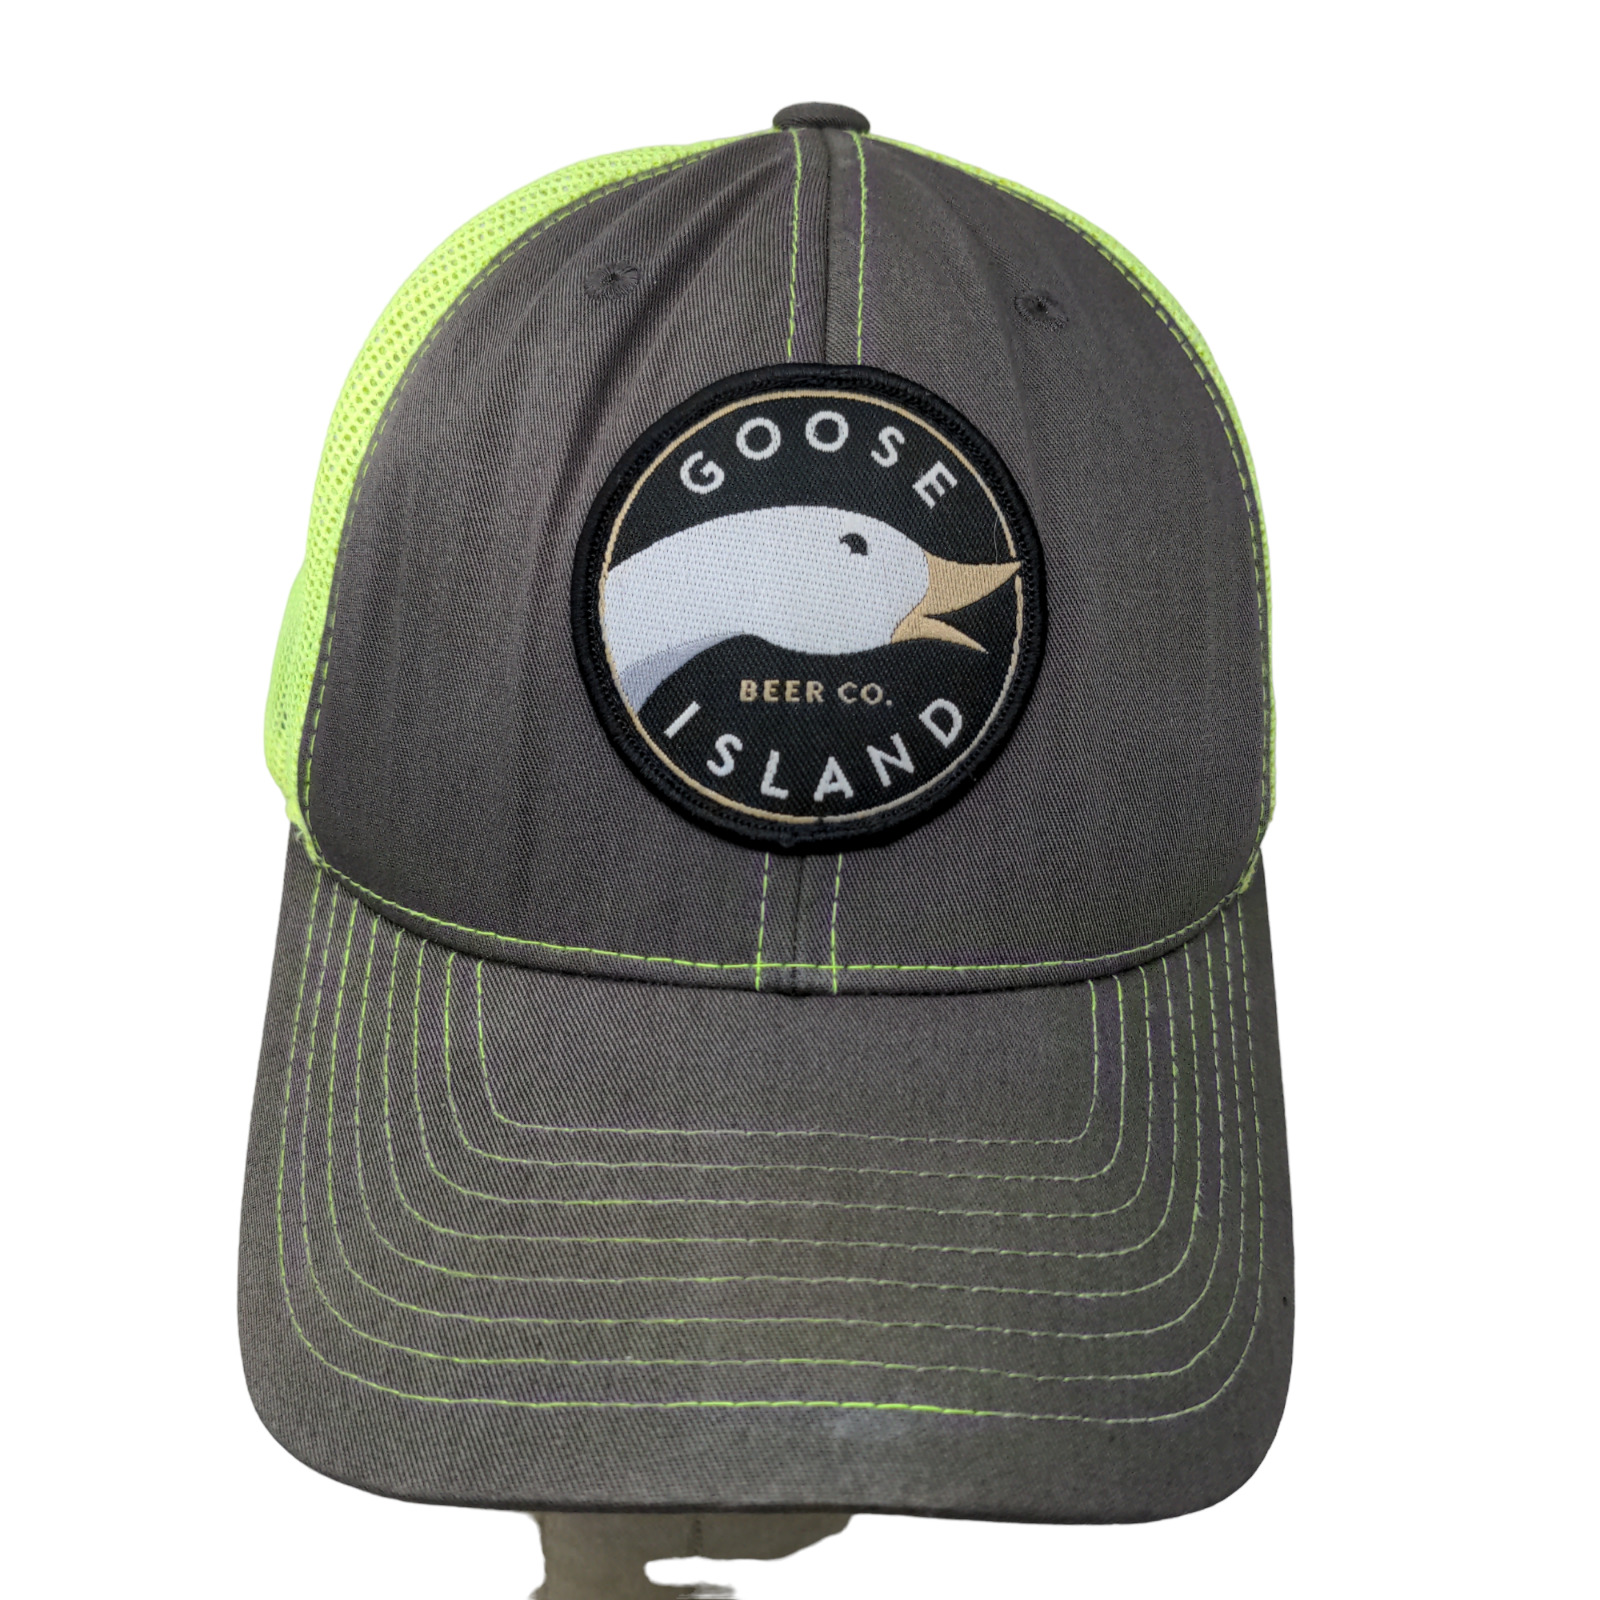 Goose Island Beer Co Mens Meshback Snapback Hat Gray Yellow Embroidered Logo